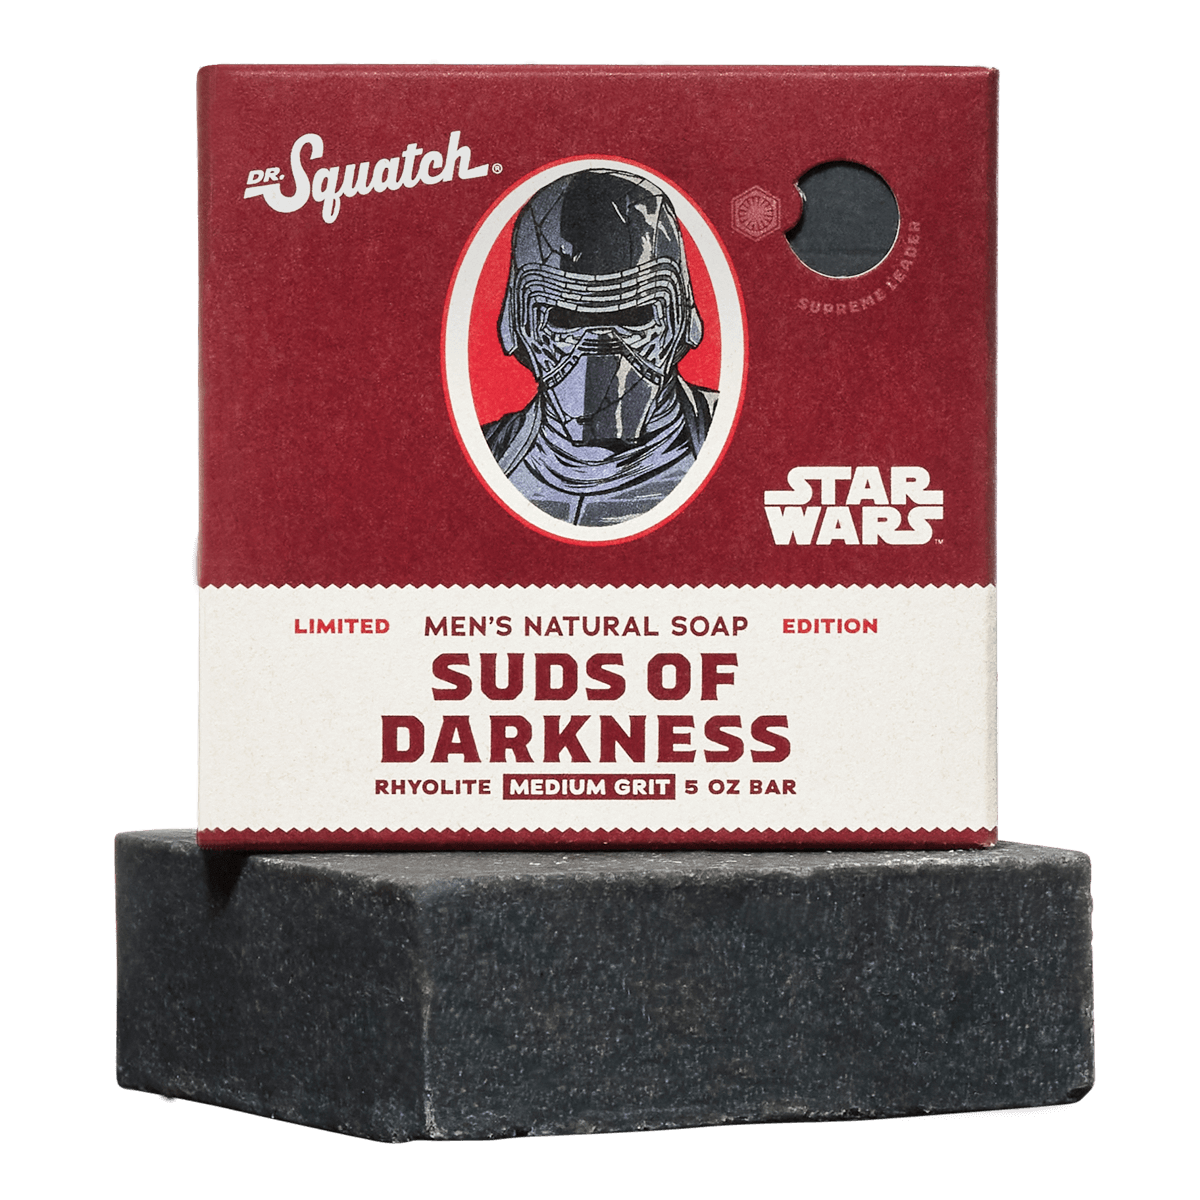 Indie Beauty Brand Dr. Squatch Launches 'Star Wars' Soap Collection